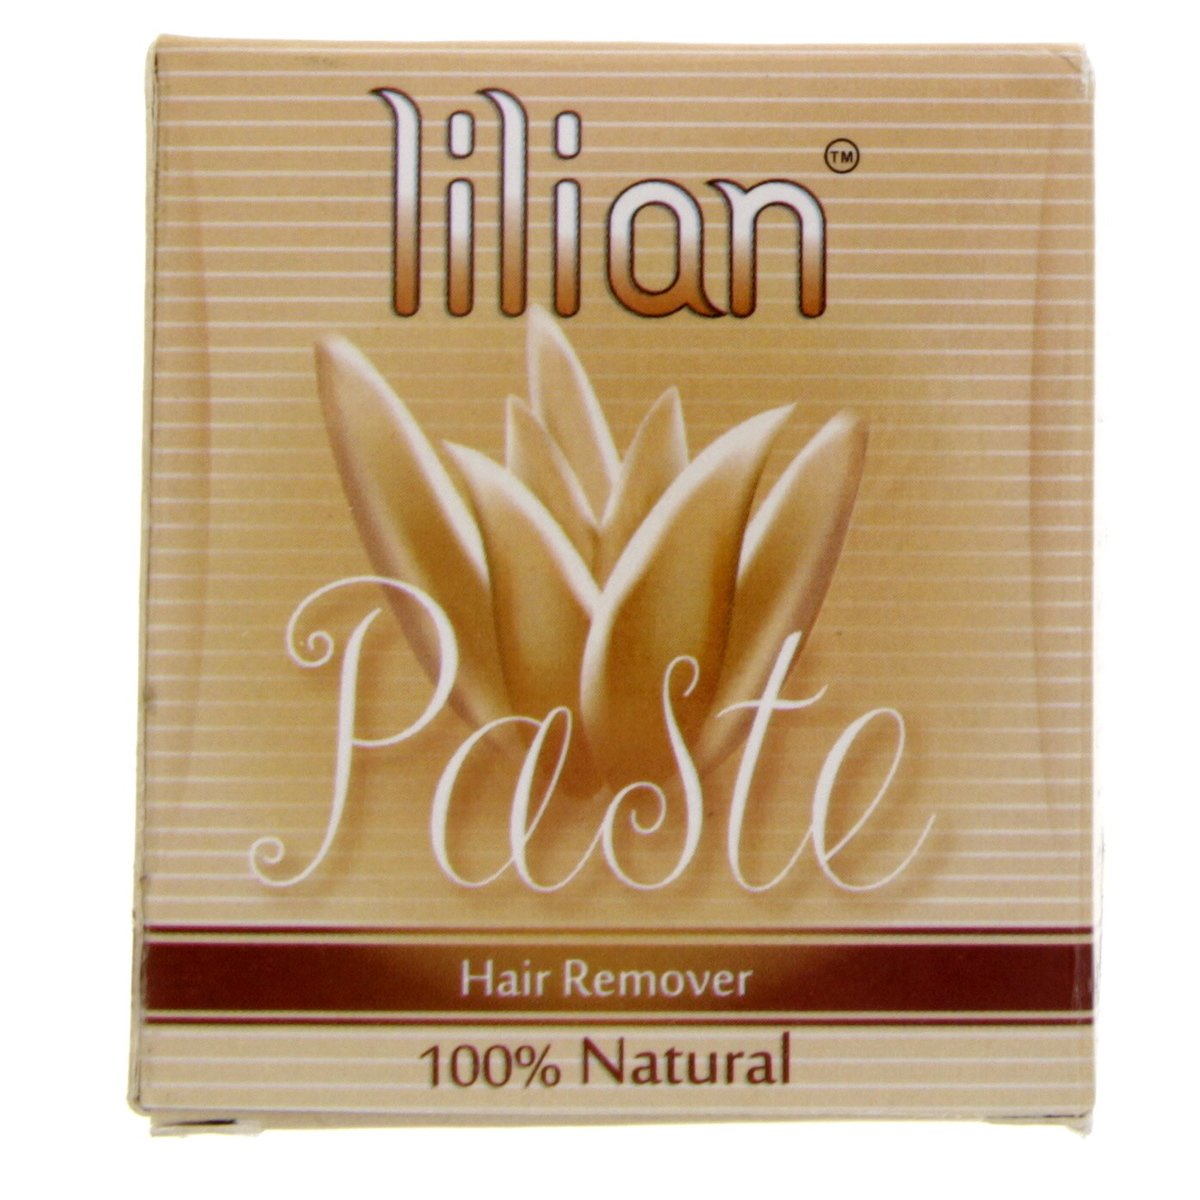 Lilian Paste Hair Remover 100% Natural 90g